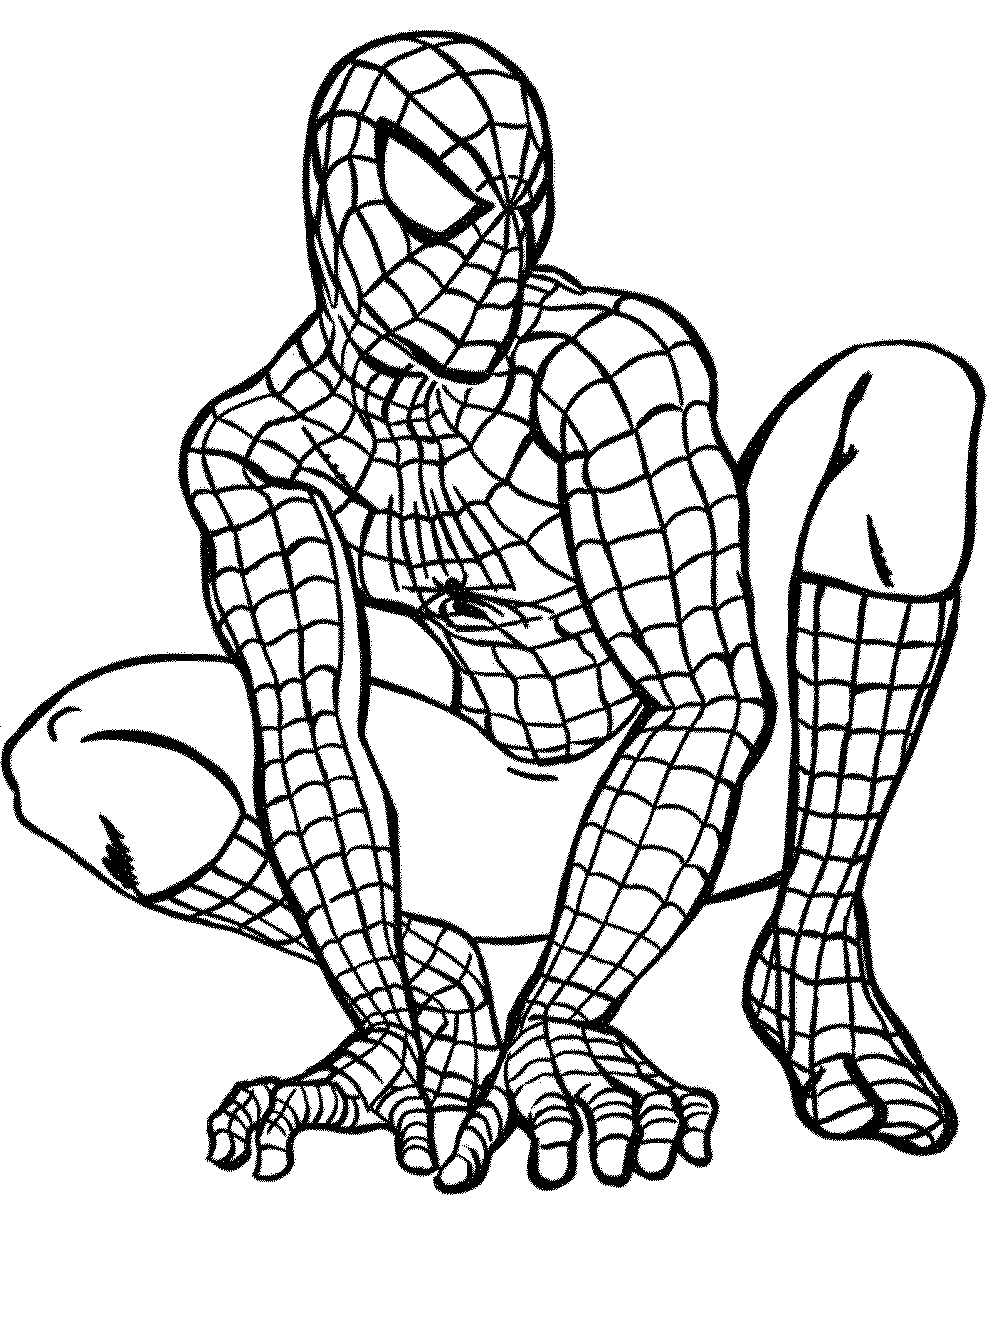 spiderman coloring pages free spiderman coloring page download for free print spiderman pages coloring free 